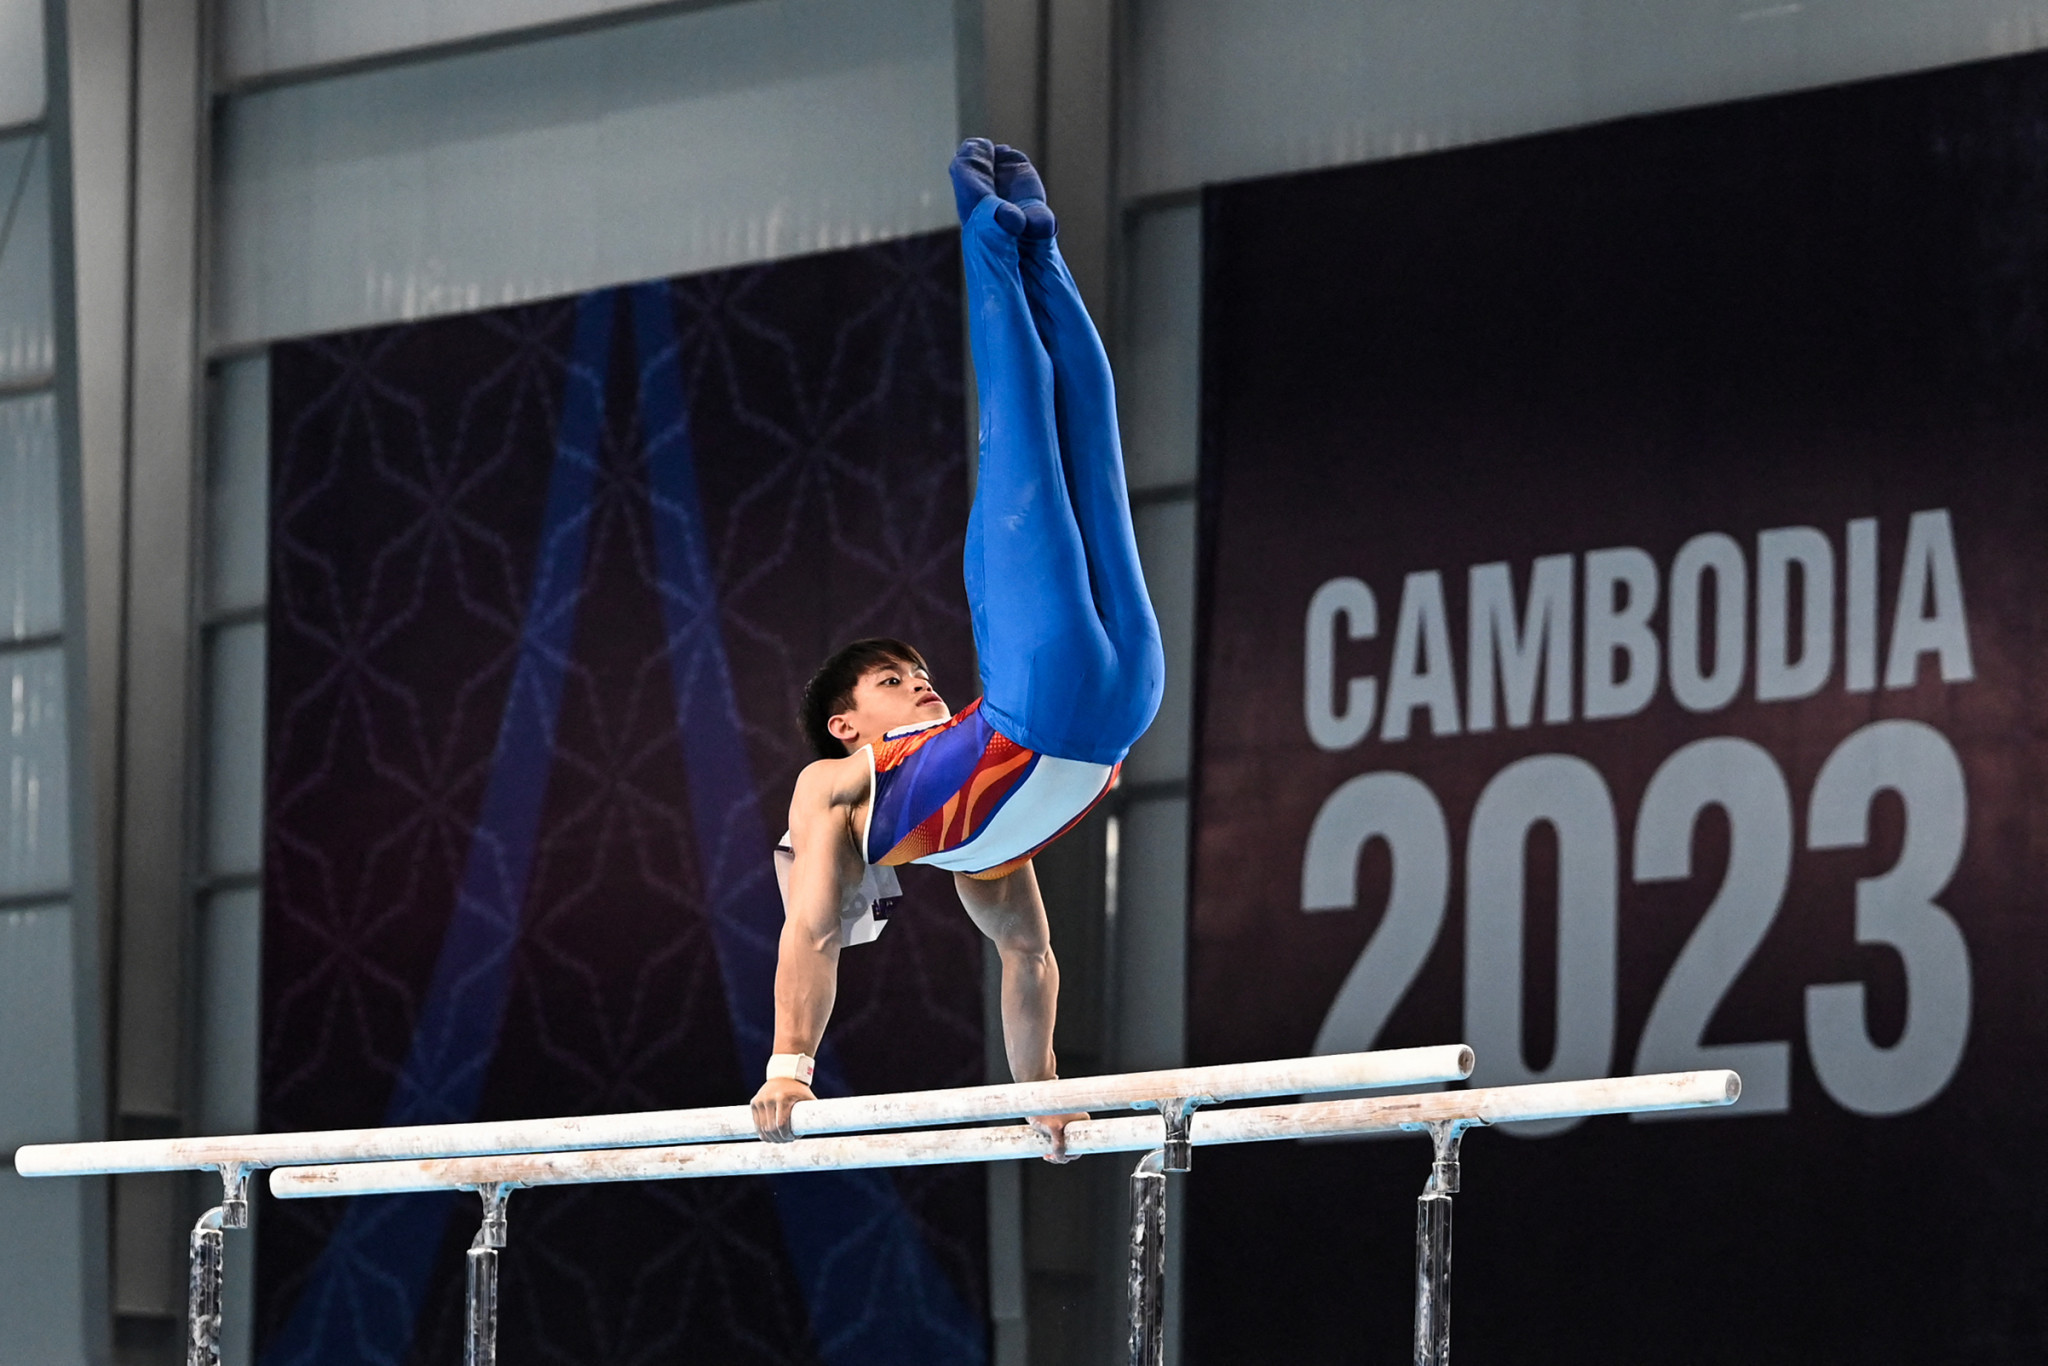 Carlos Yulo has won the men's artistic gymnastics all-around title at the Southeast Asian Games for the third time ©Getty Images